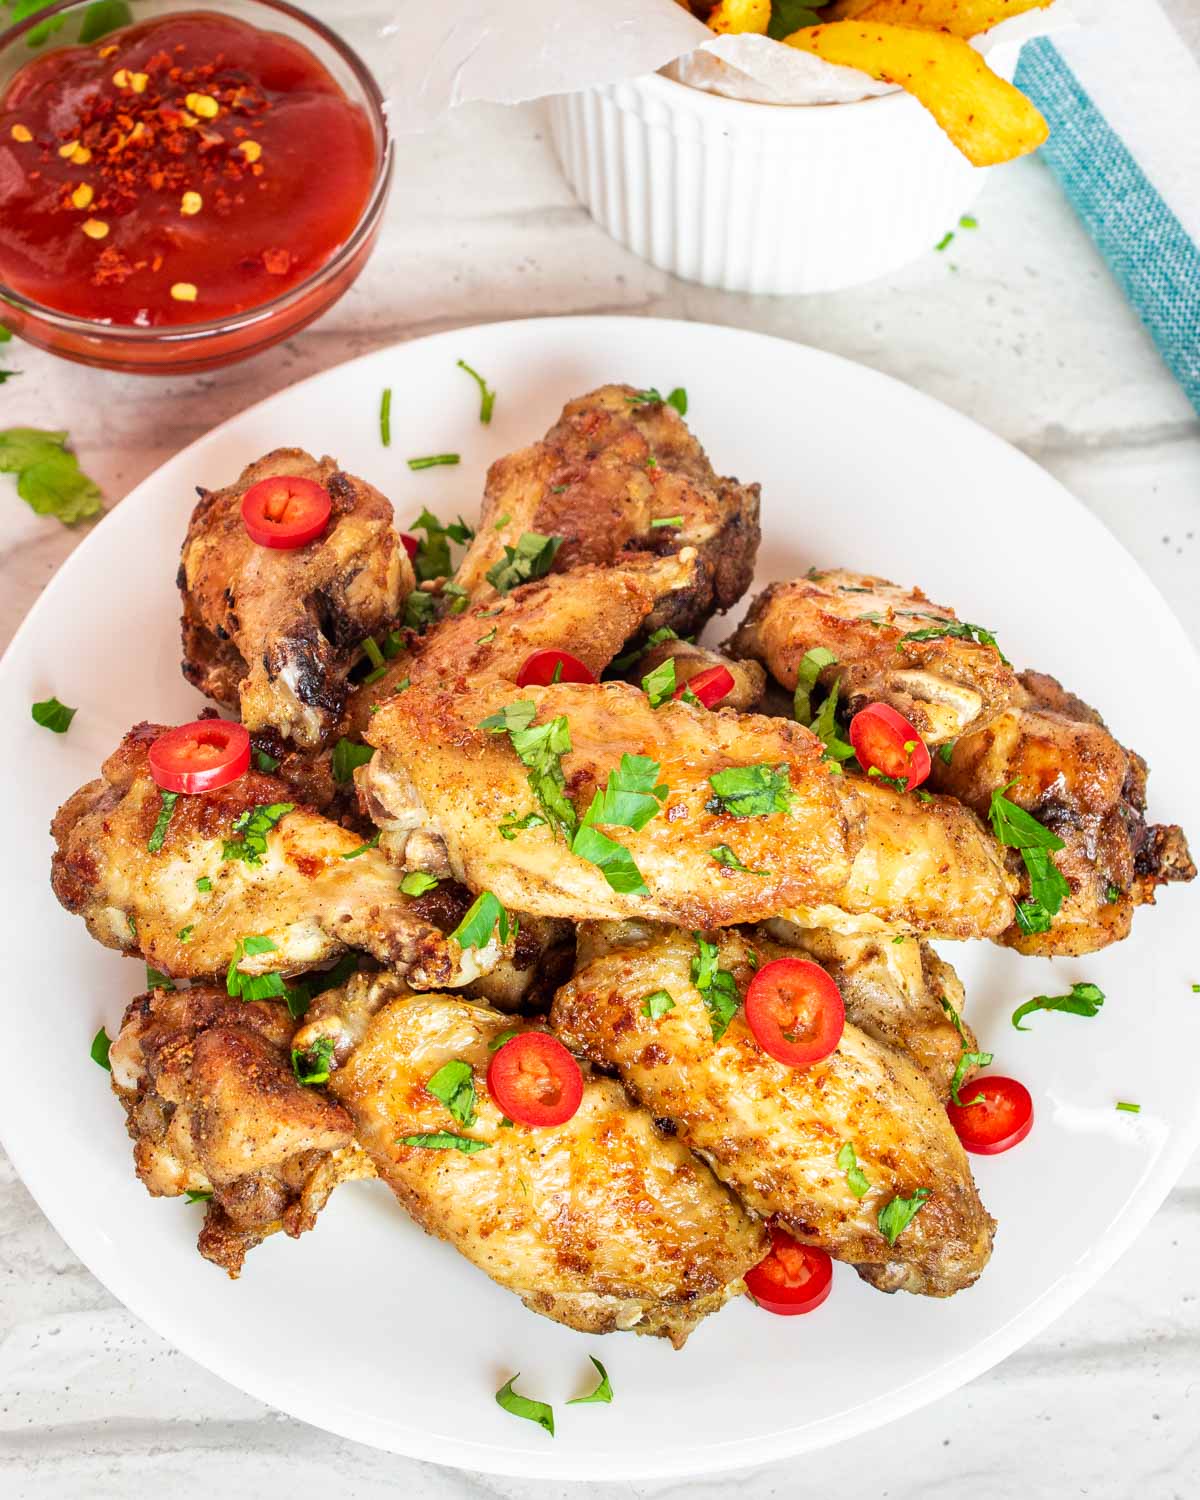 chicken wings on a white plate garnished with parsley and red chili peppers.